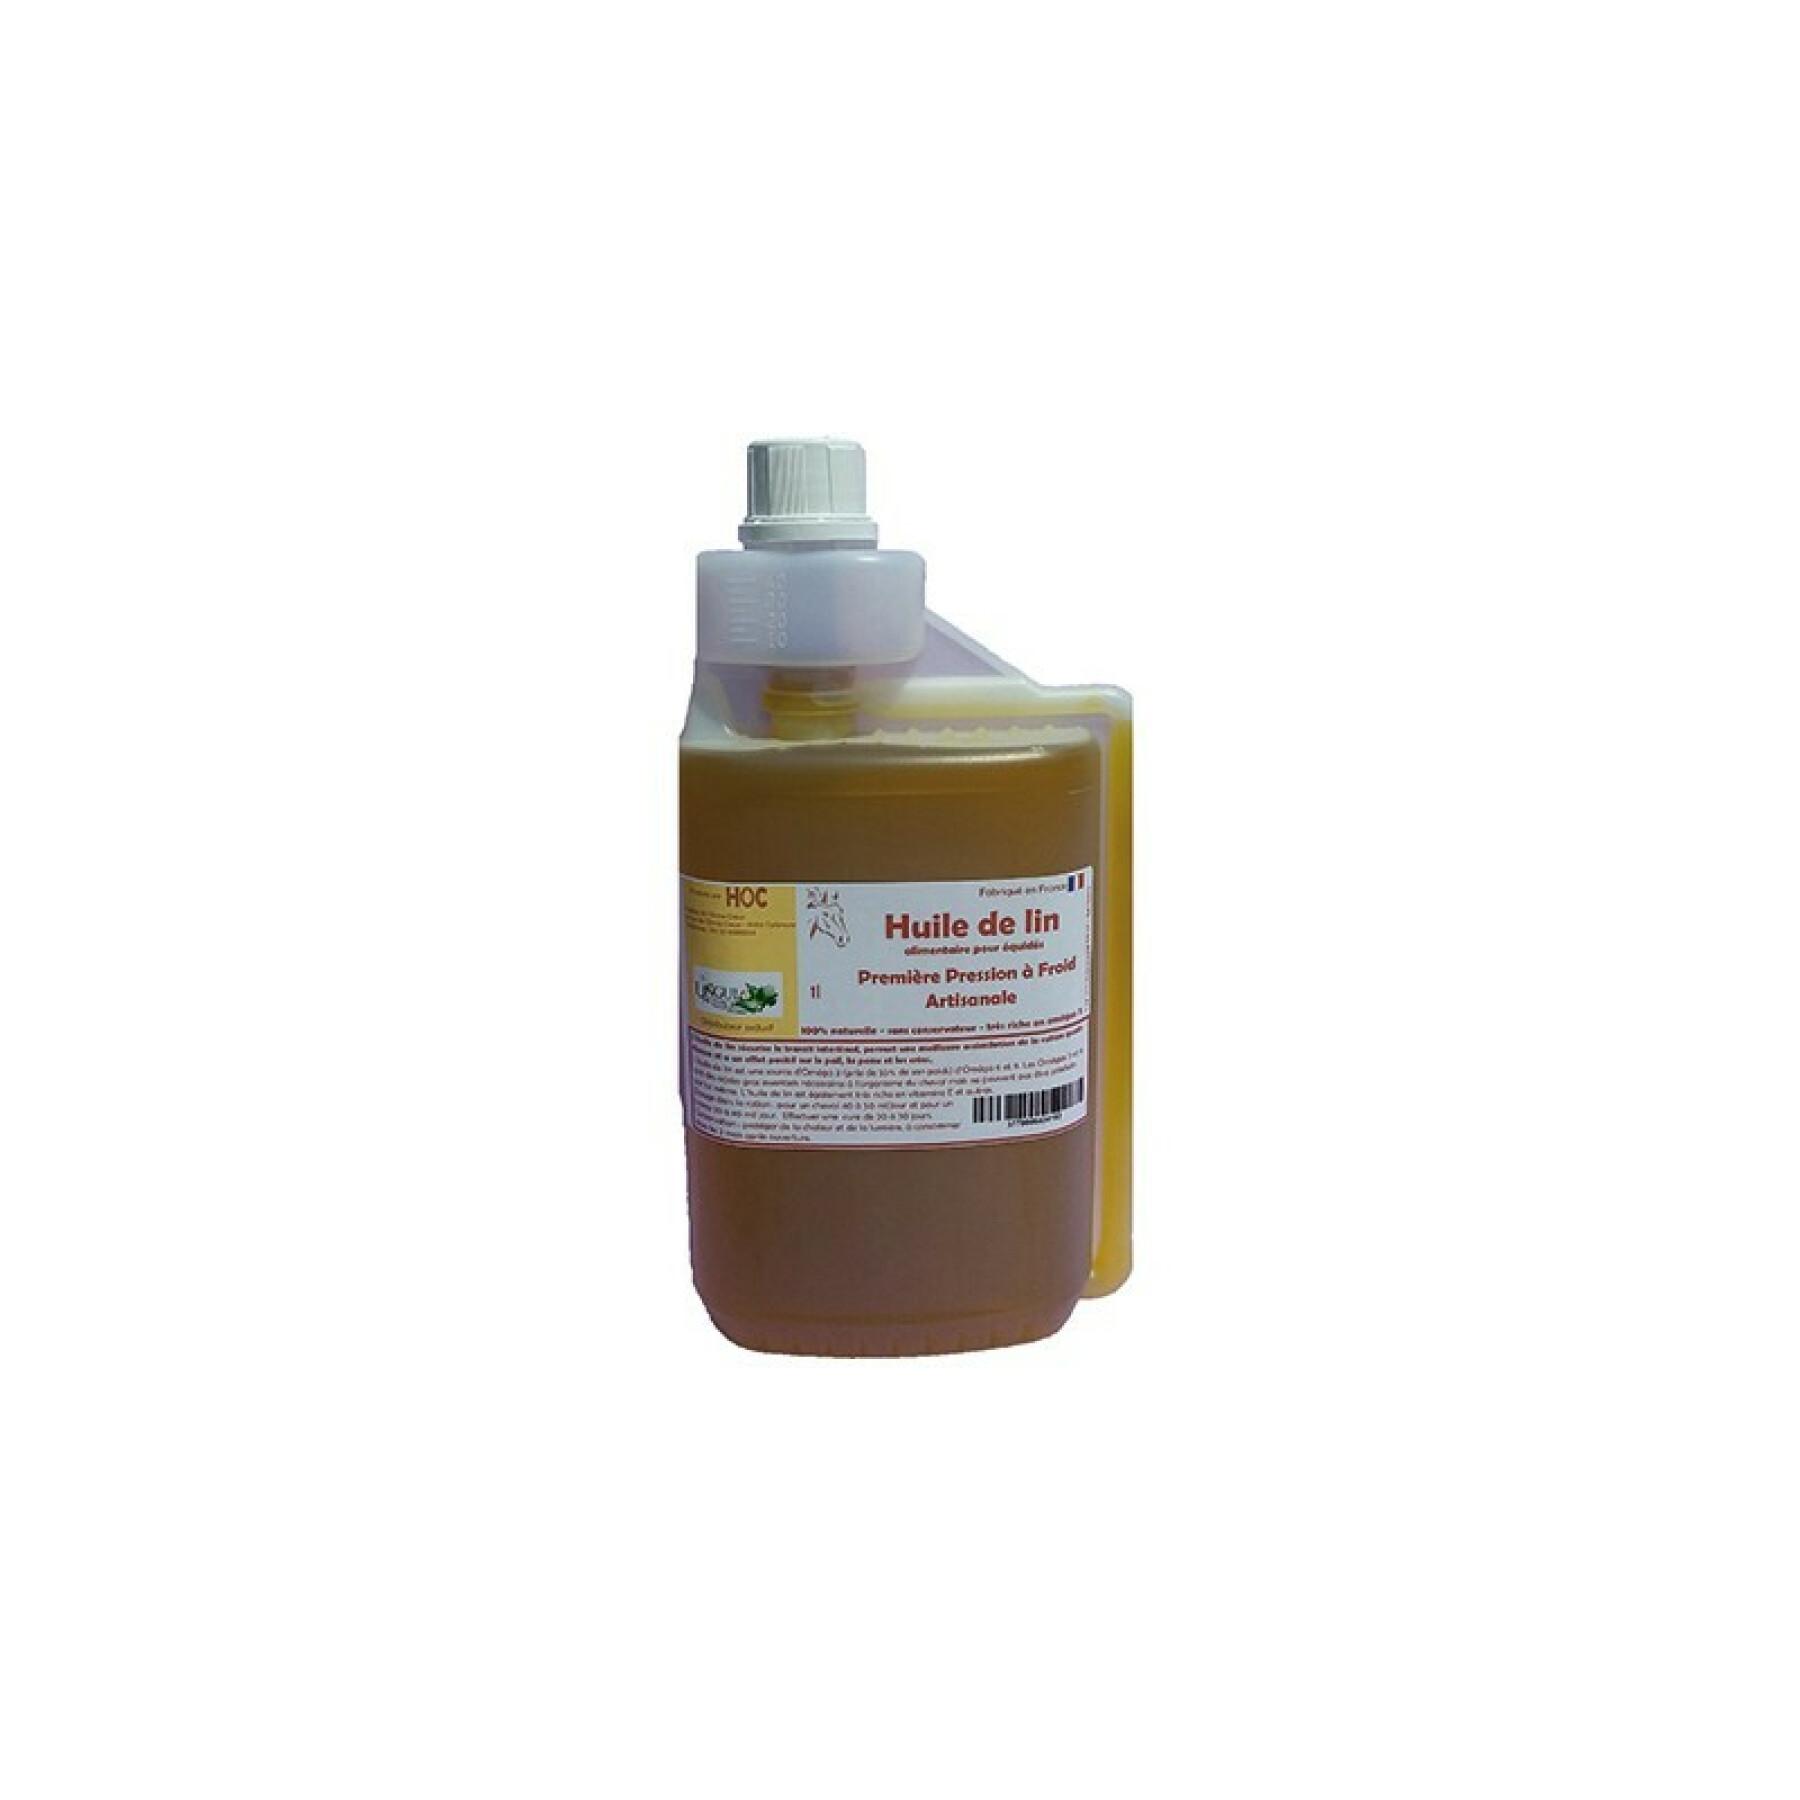 Linseed oil in a measuring bottle Ungula 1 L